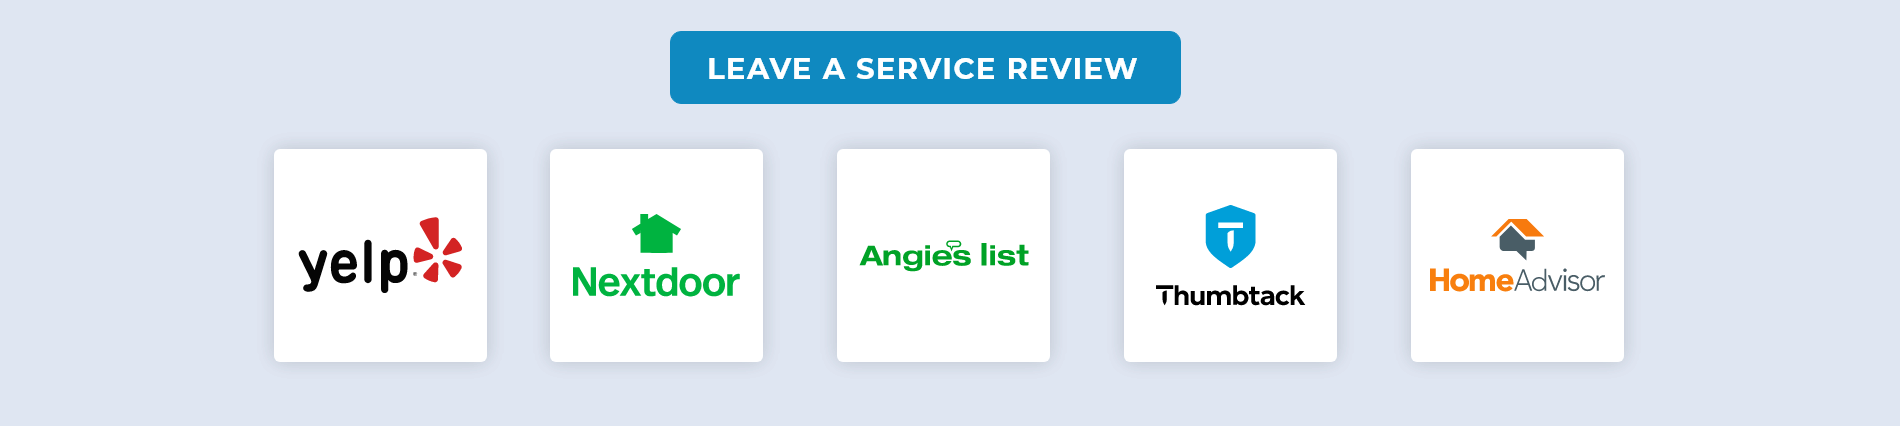 Leave a service review